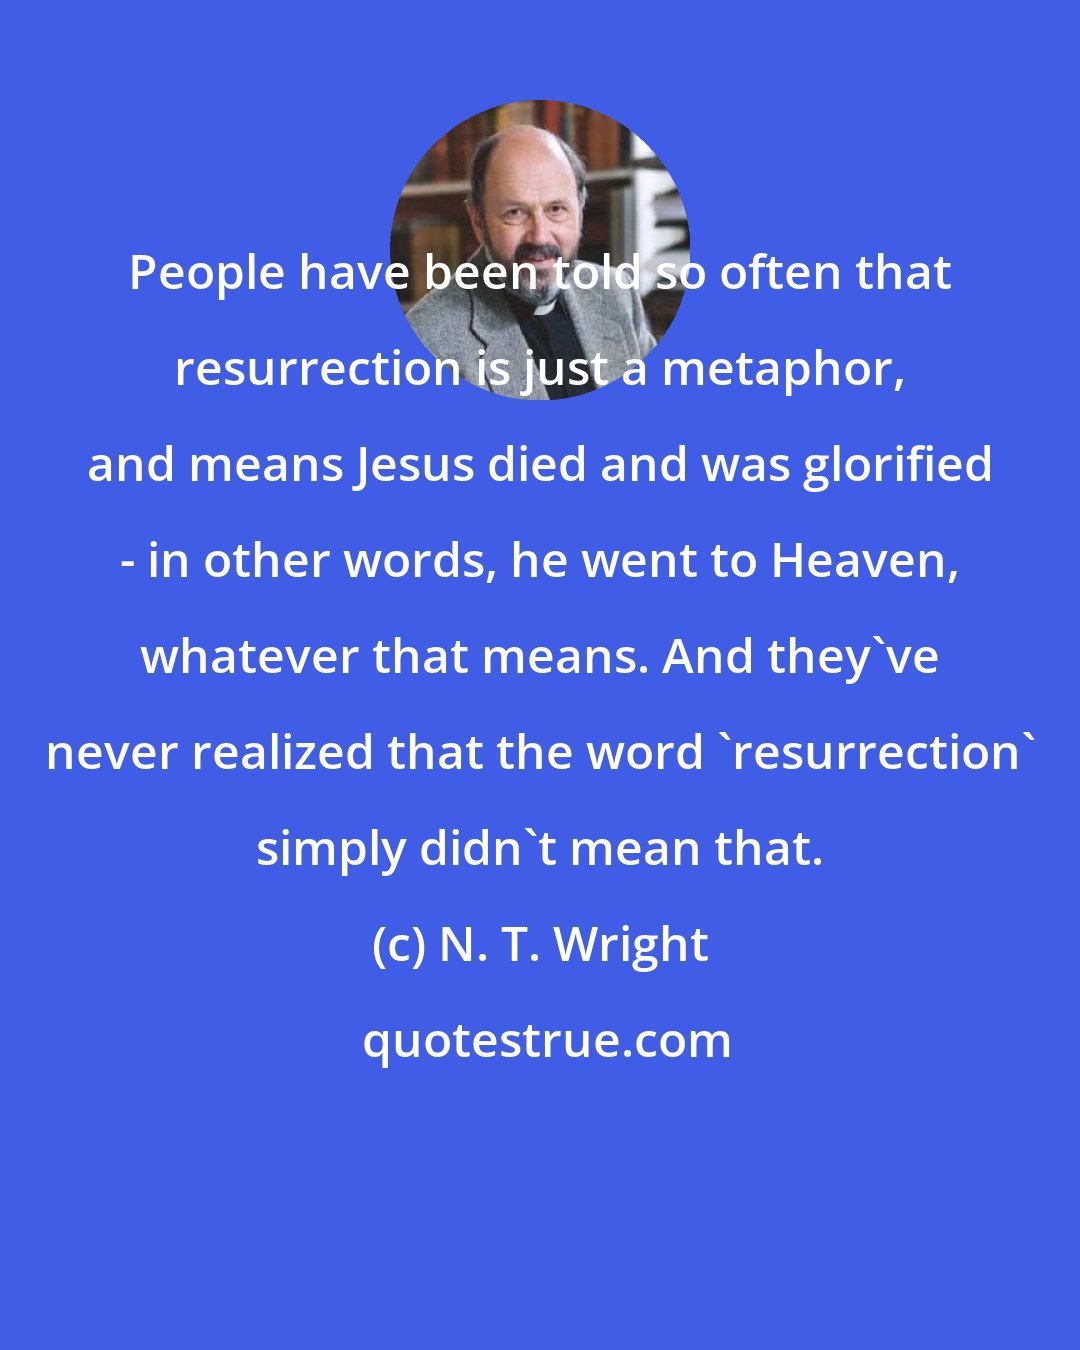 N. T. Wright: People have been told so often that resurrection is just a metaphor, and means Jesus died and was glorified - in other words, he went to Heaven, whatever that means. And they've never realized that the word 'resurrection' simply didn't mean that.